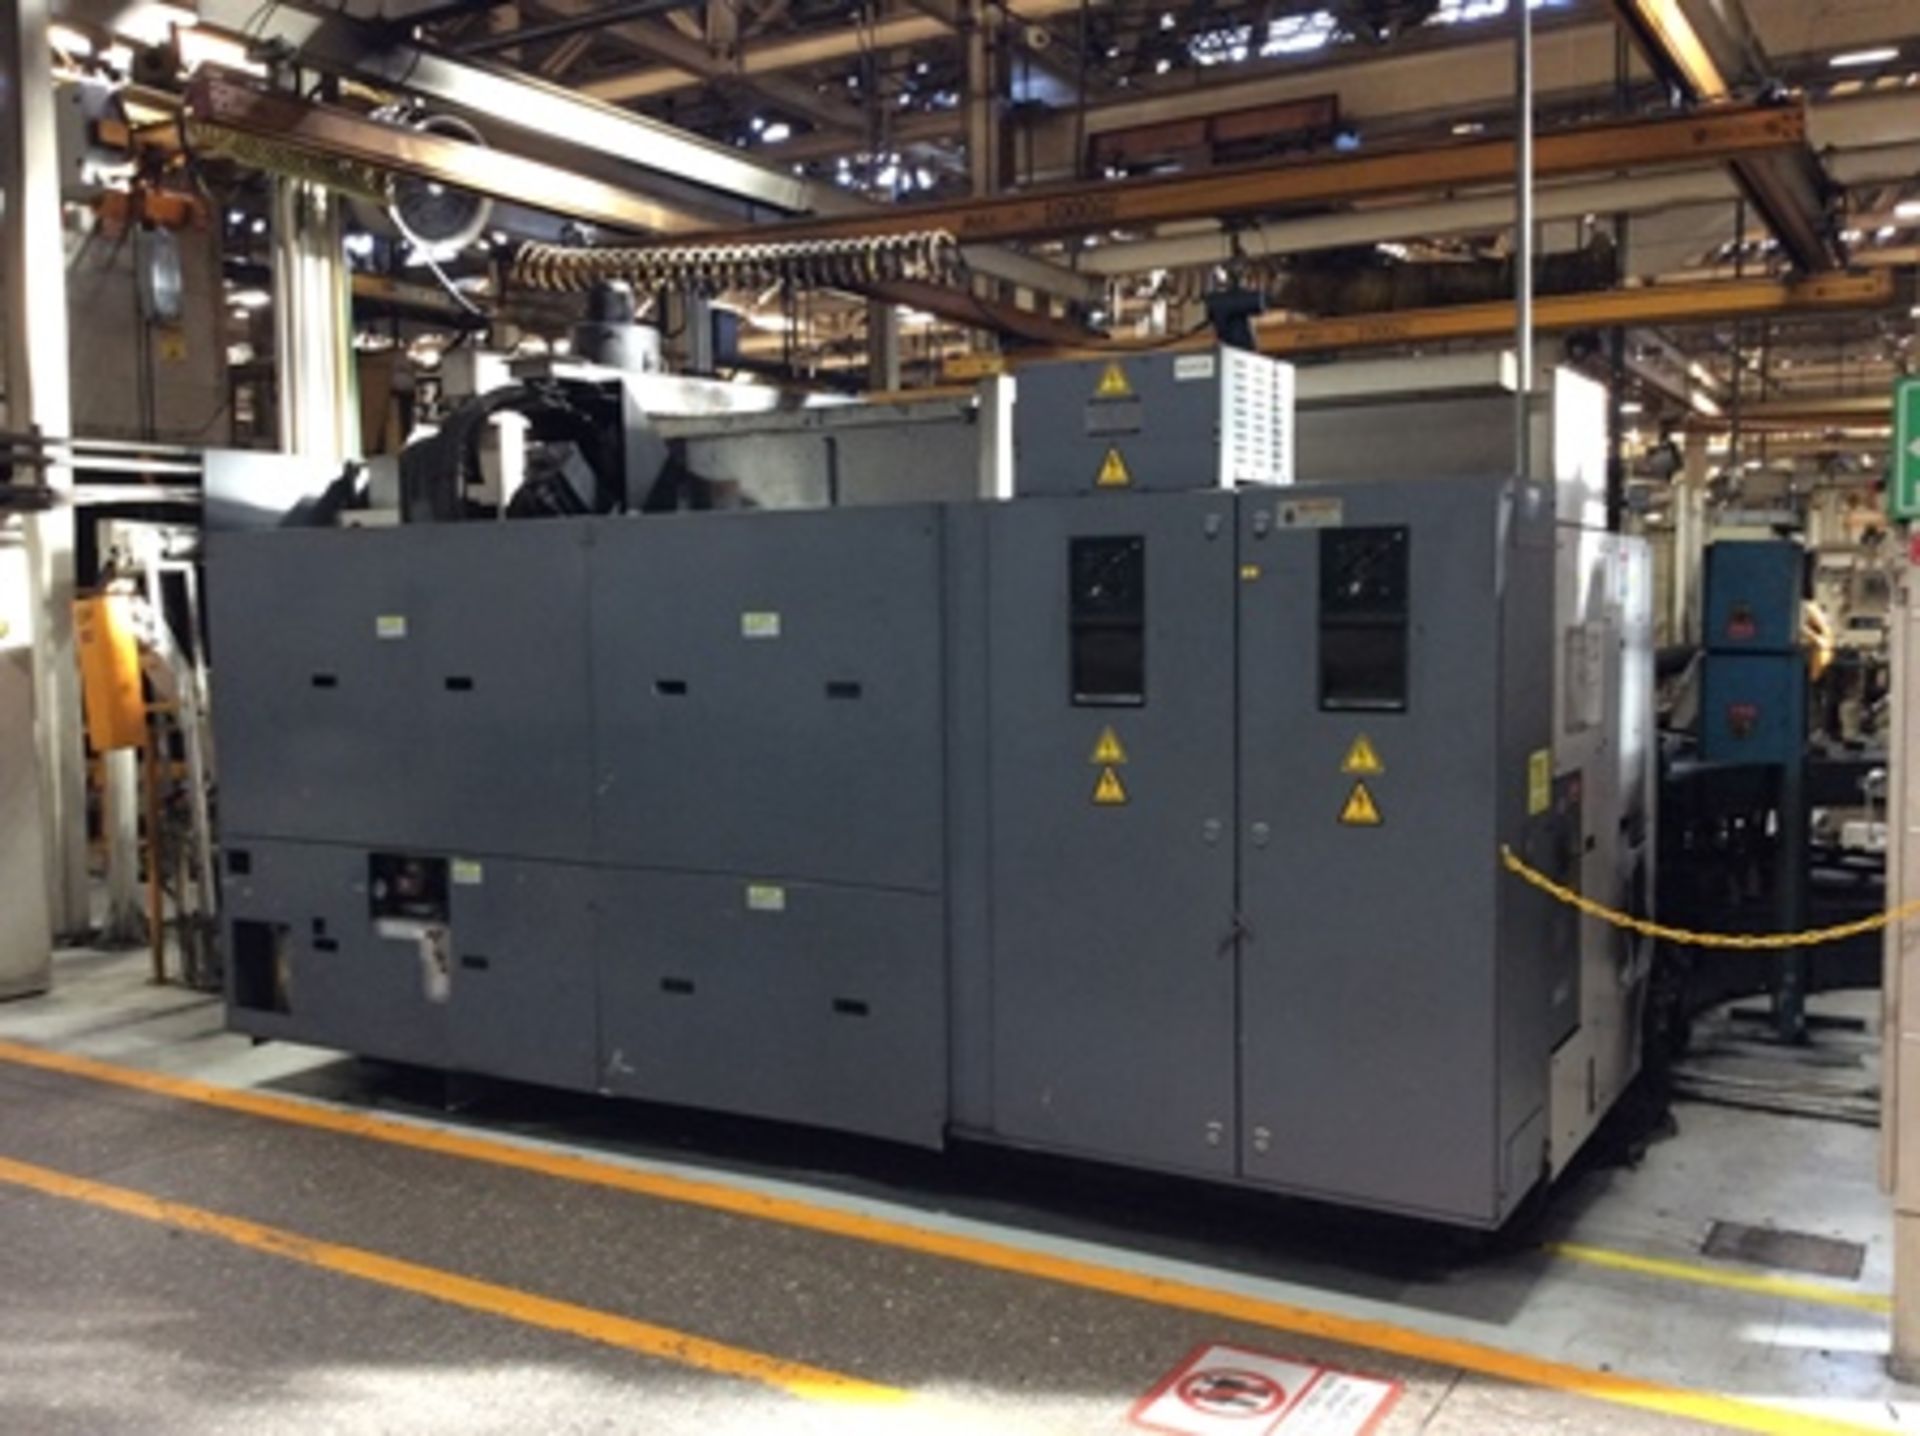 Okuma CNC, Impact LU35 series 120404 year2006. With double turret for toolholder (10 to 12) - Image 11 of 26